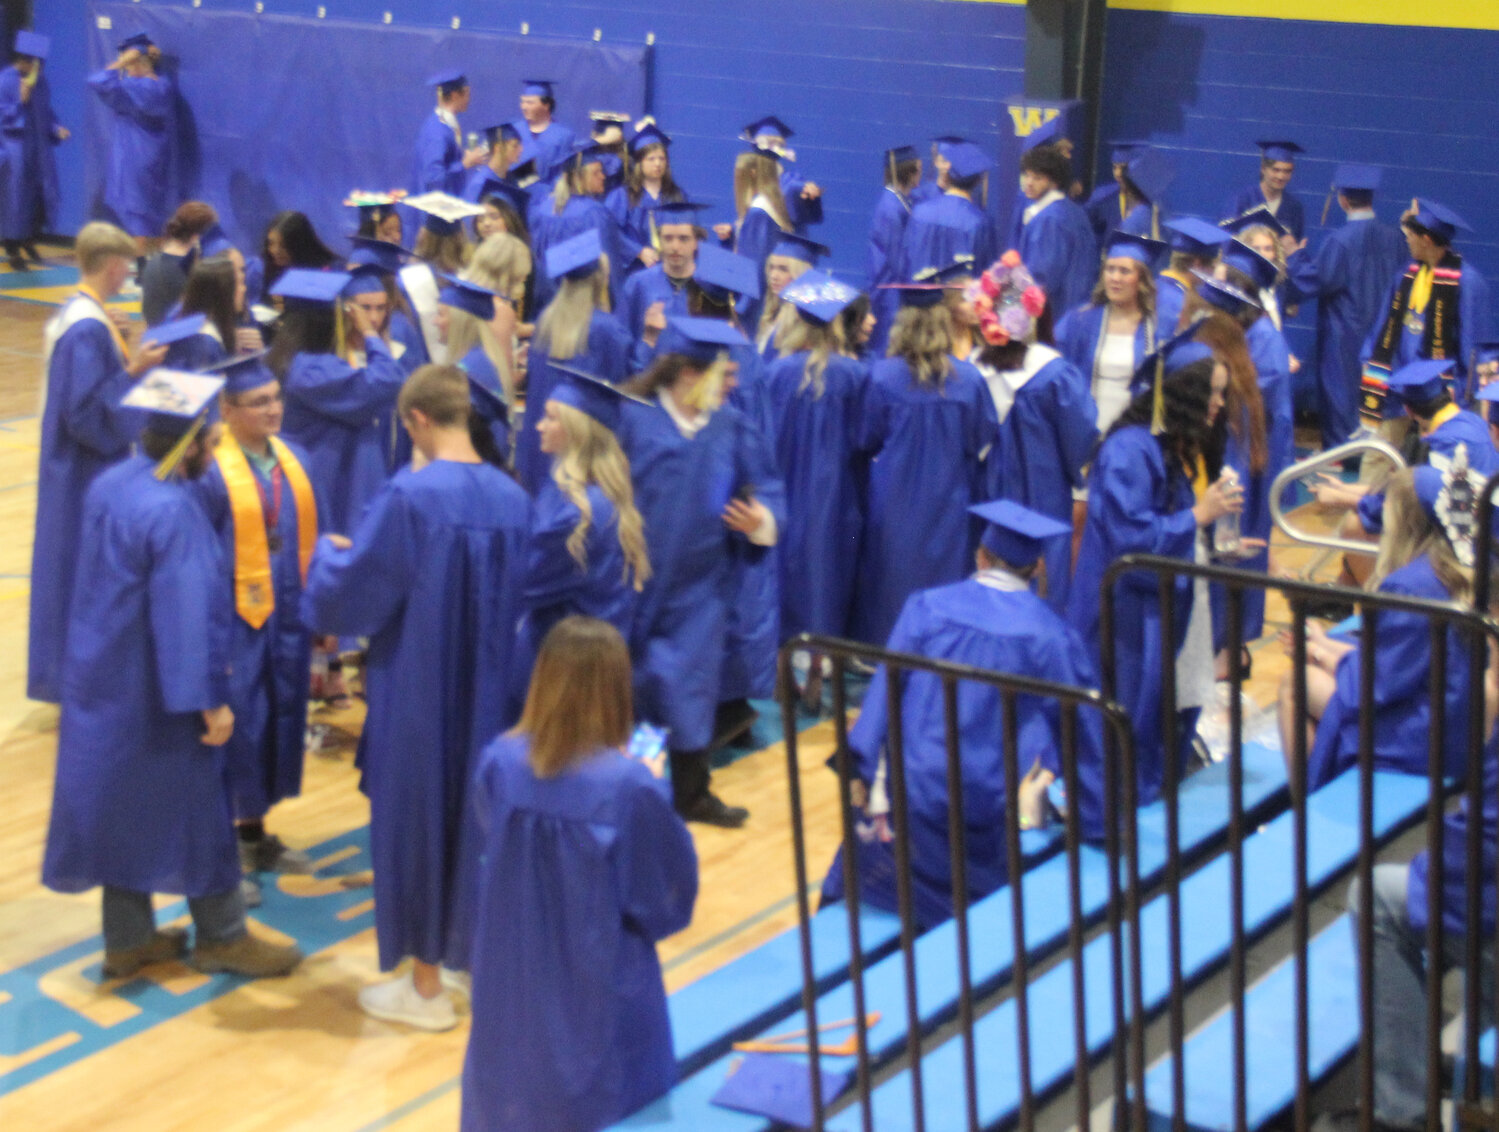 Classmates and friends mingled in the Wright City High School gym before the start of the graduation ceremony on June 2.